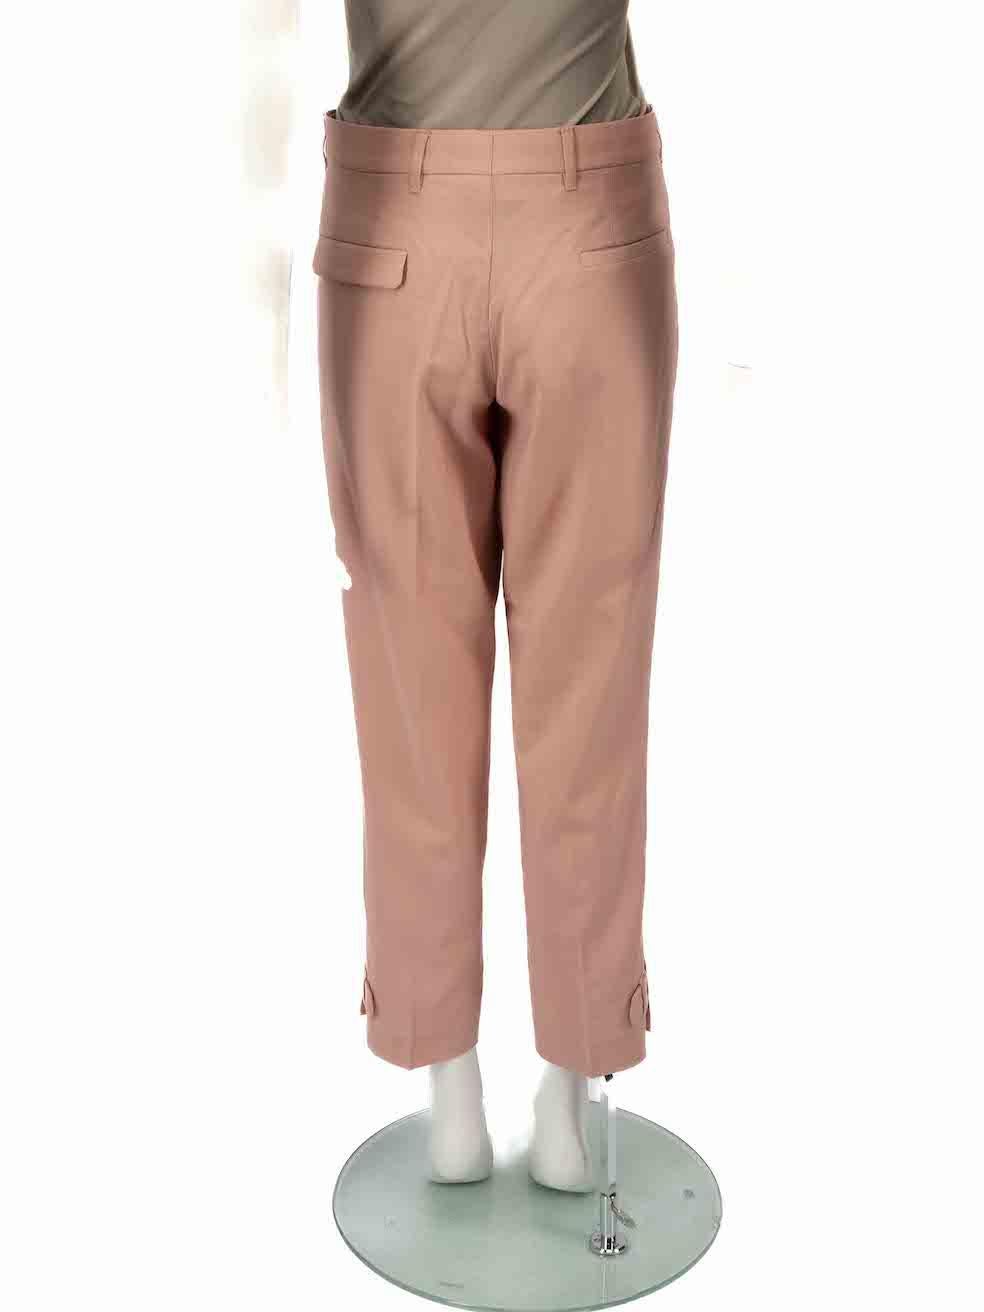 Miu Miu Pink Straight Leg Trousers Size L In Good Condition For Sale In London, GB